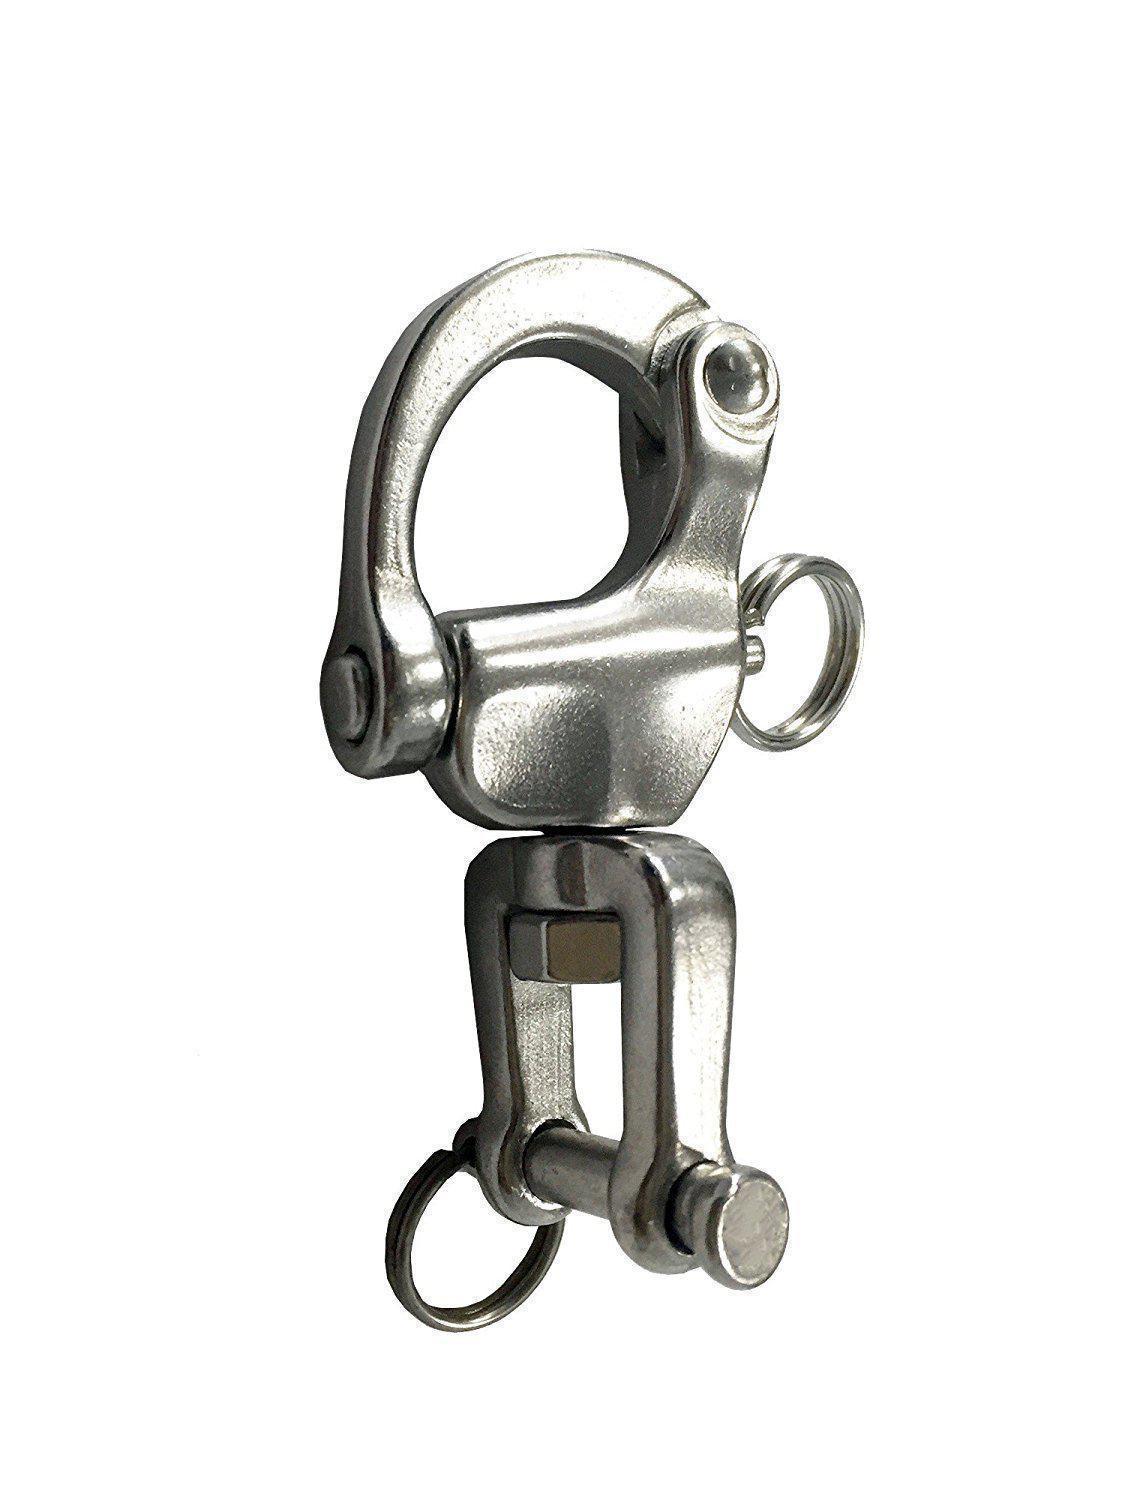 2-3/4" Jaw Swivel Snap Tack Shackle w/ Clevis for Sailboat - Stainless Steel - Five Oceans (BC 446)-Canadian Marine &amp; Outdoor Equipment